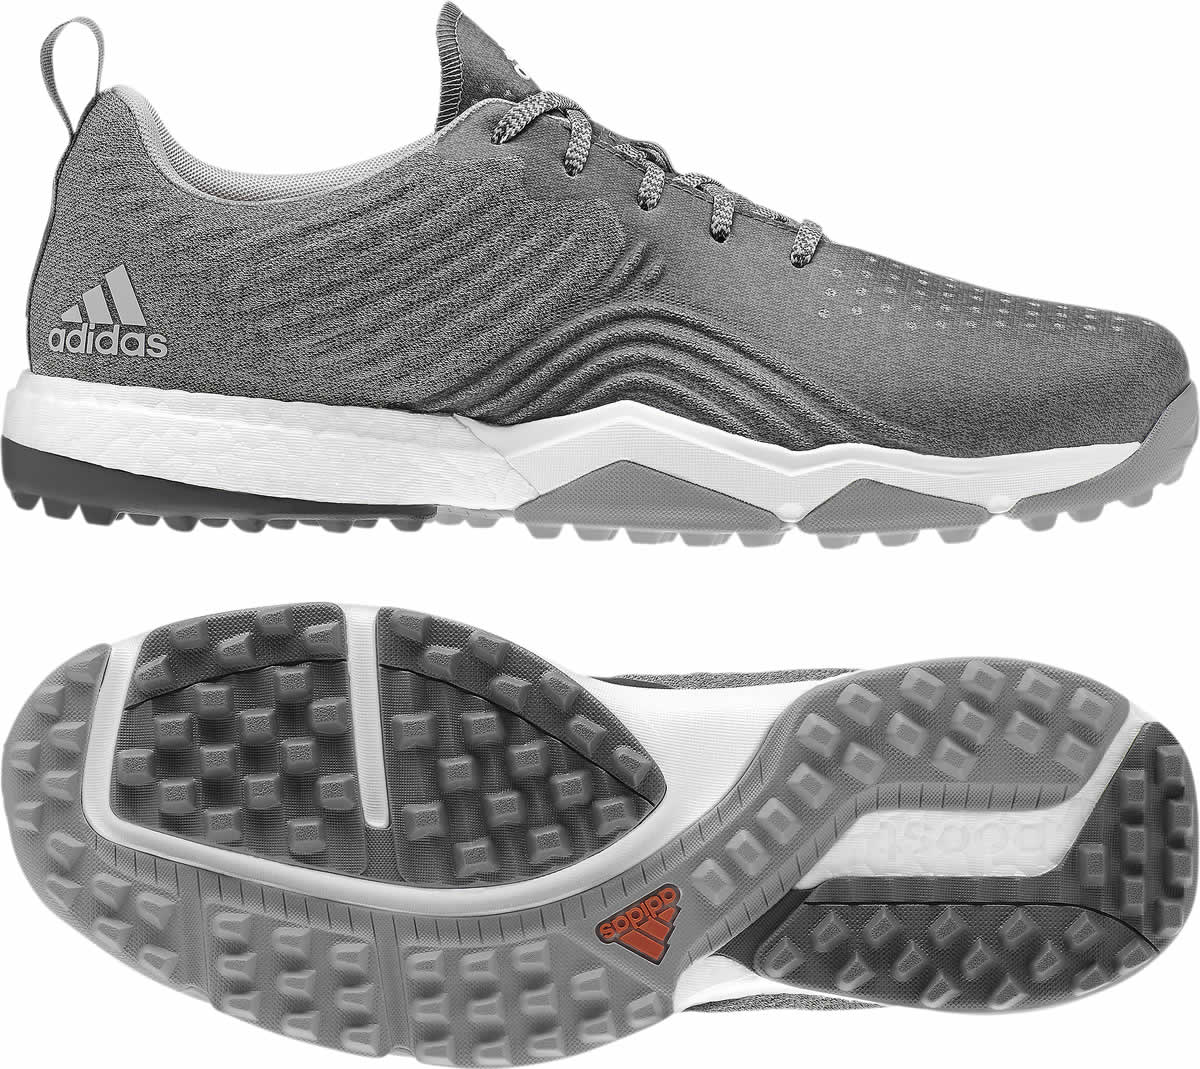 Adidas Adipower 4Orged Spikeless Golf Shoes